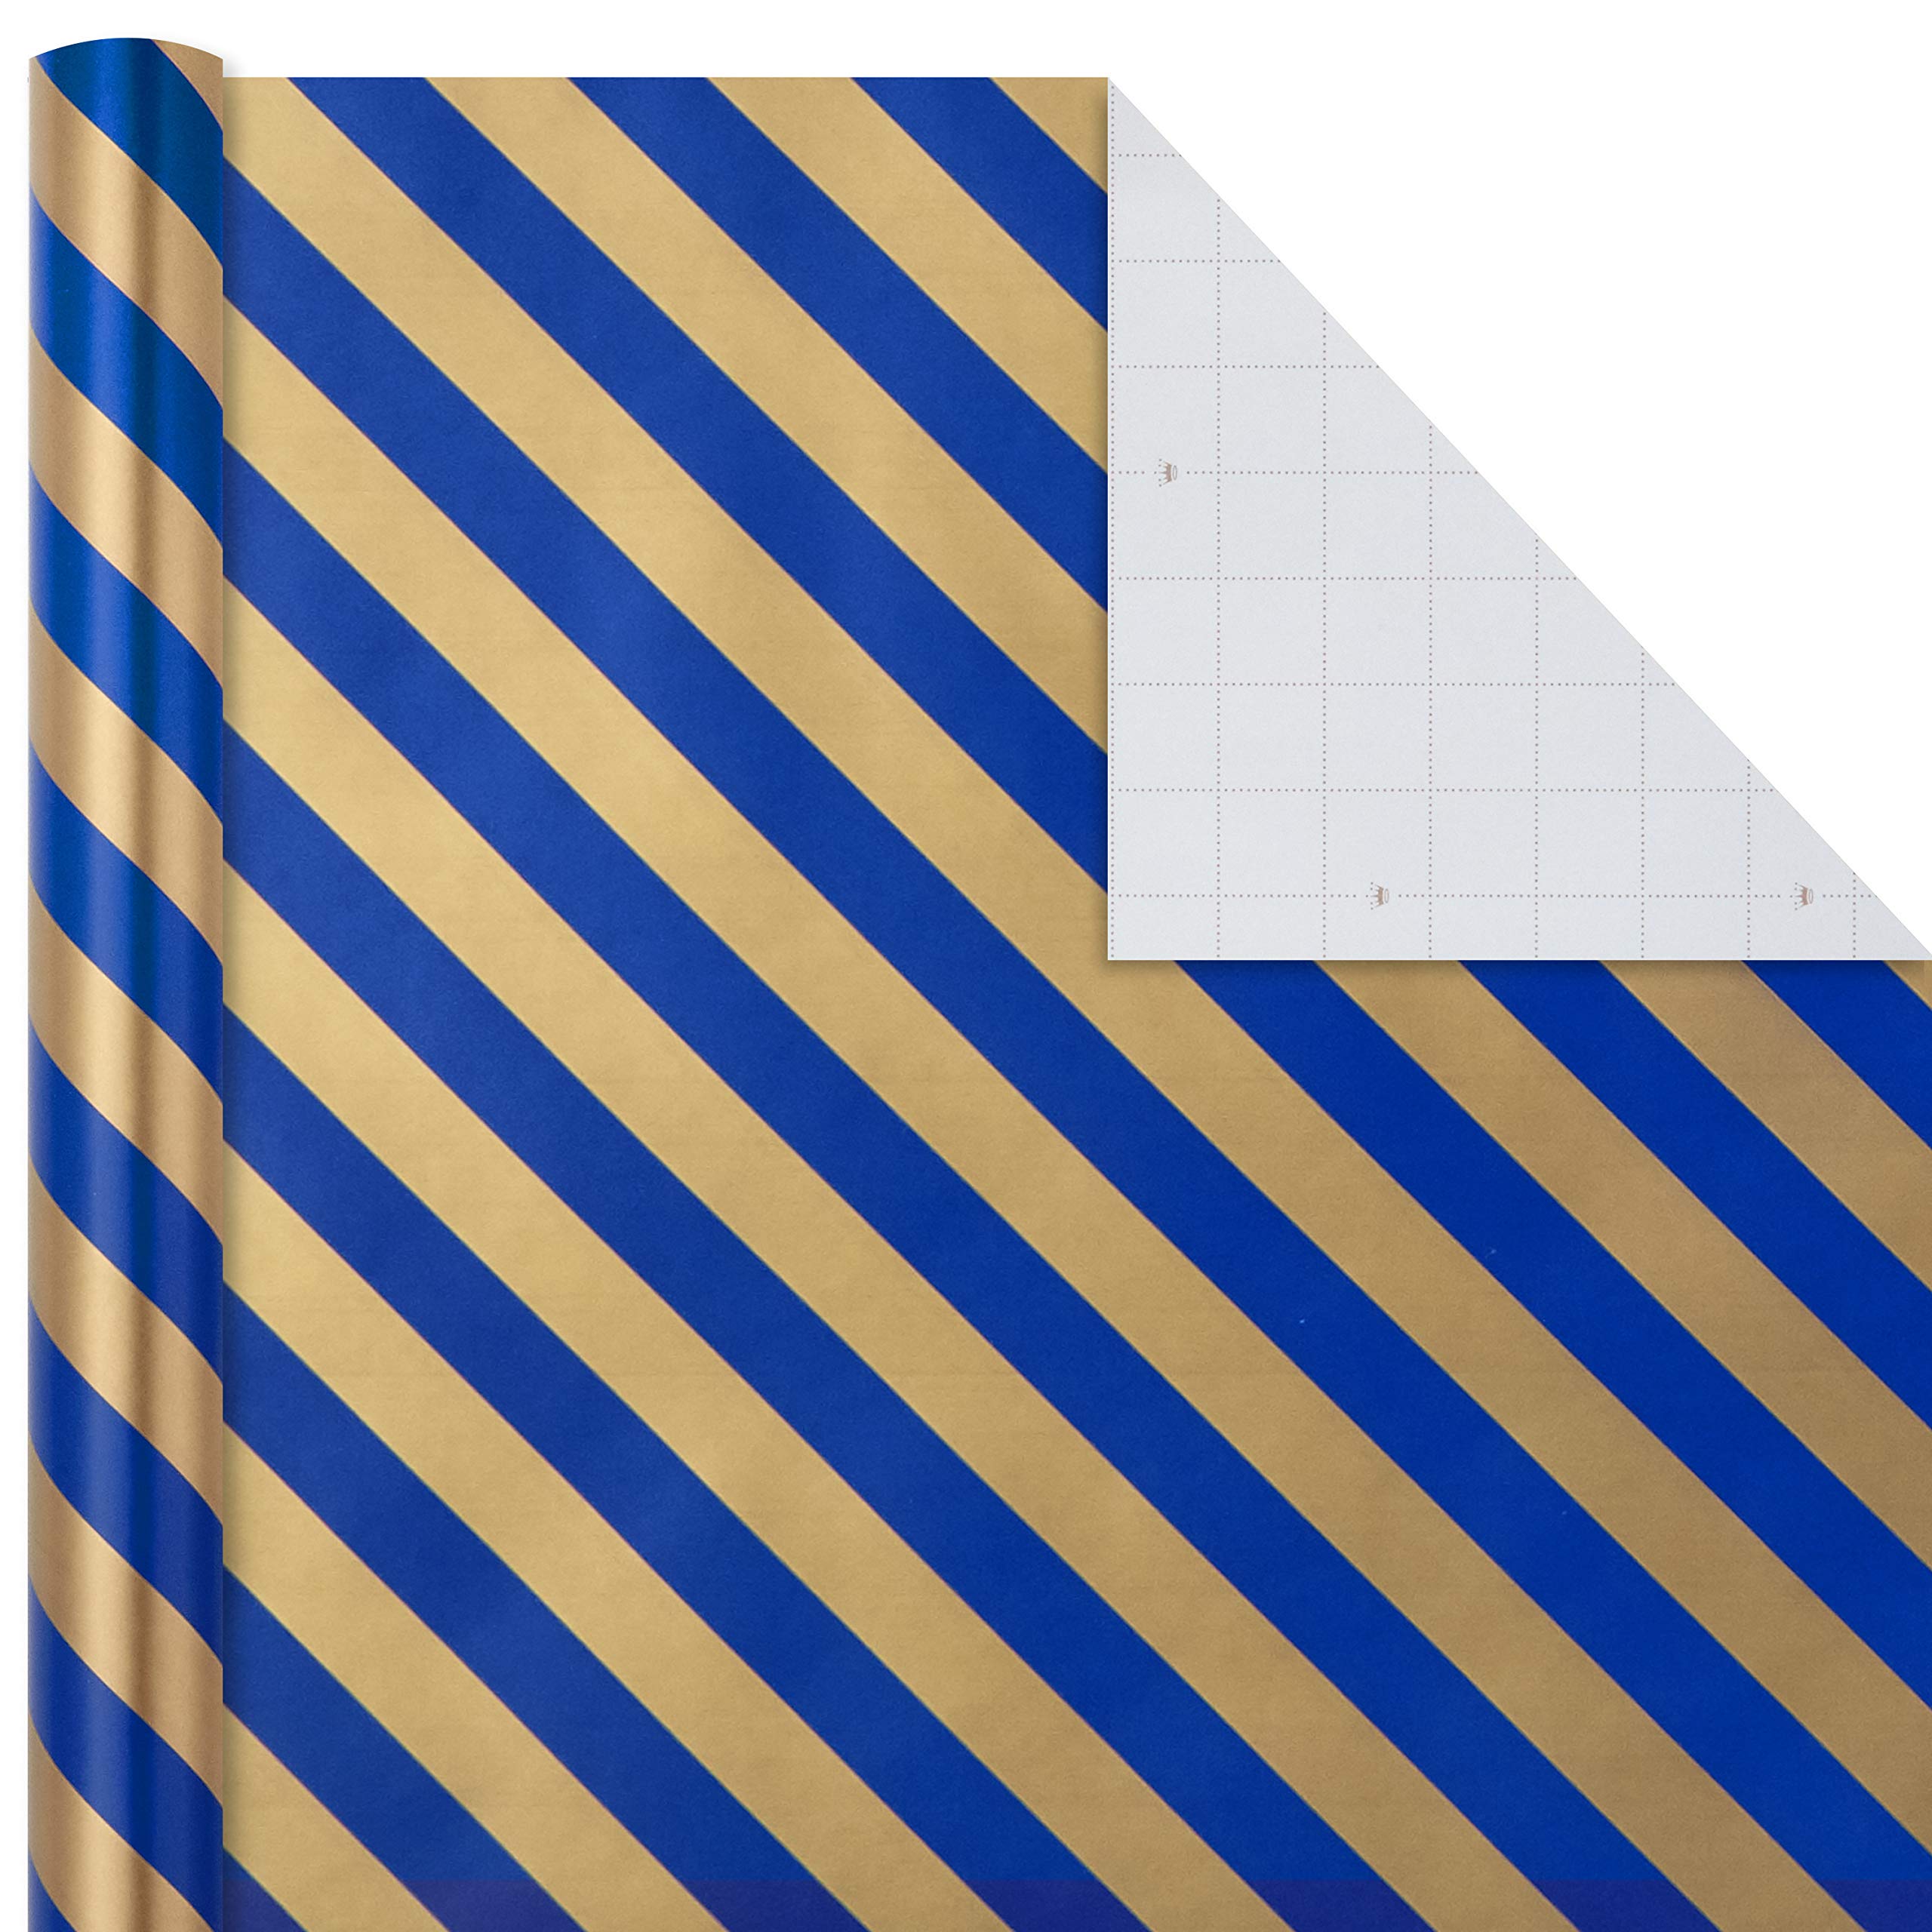 Hallmark All Occasion Wrapping Paper Bundle with Cut Lines on Reverse - Dark Blue and Gold Stripes (3-Pack: 105 sq. ft. ttl.) for Christmas, Hanukkah, Birthdays, Graduations, Father's Day, Weddings